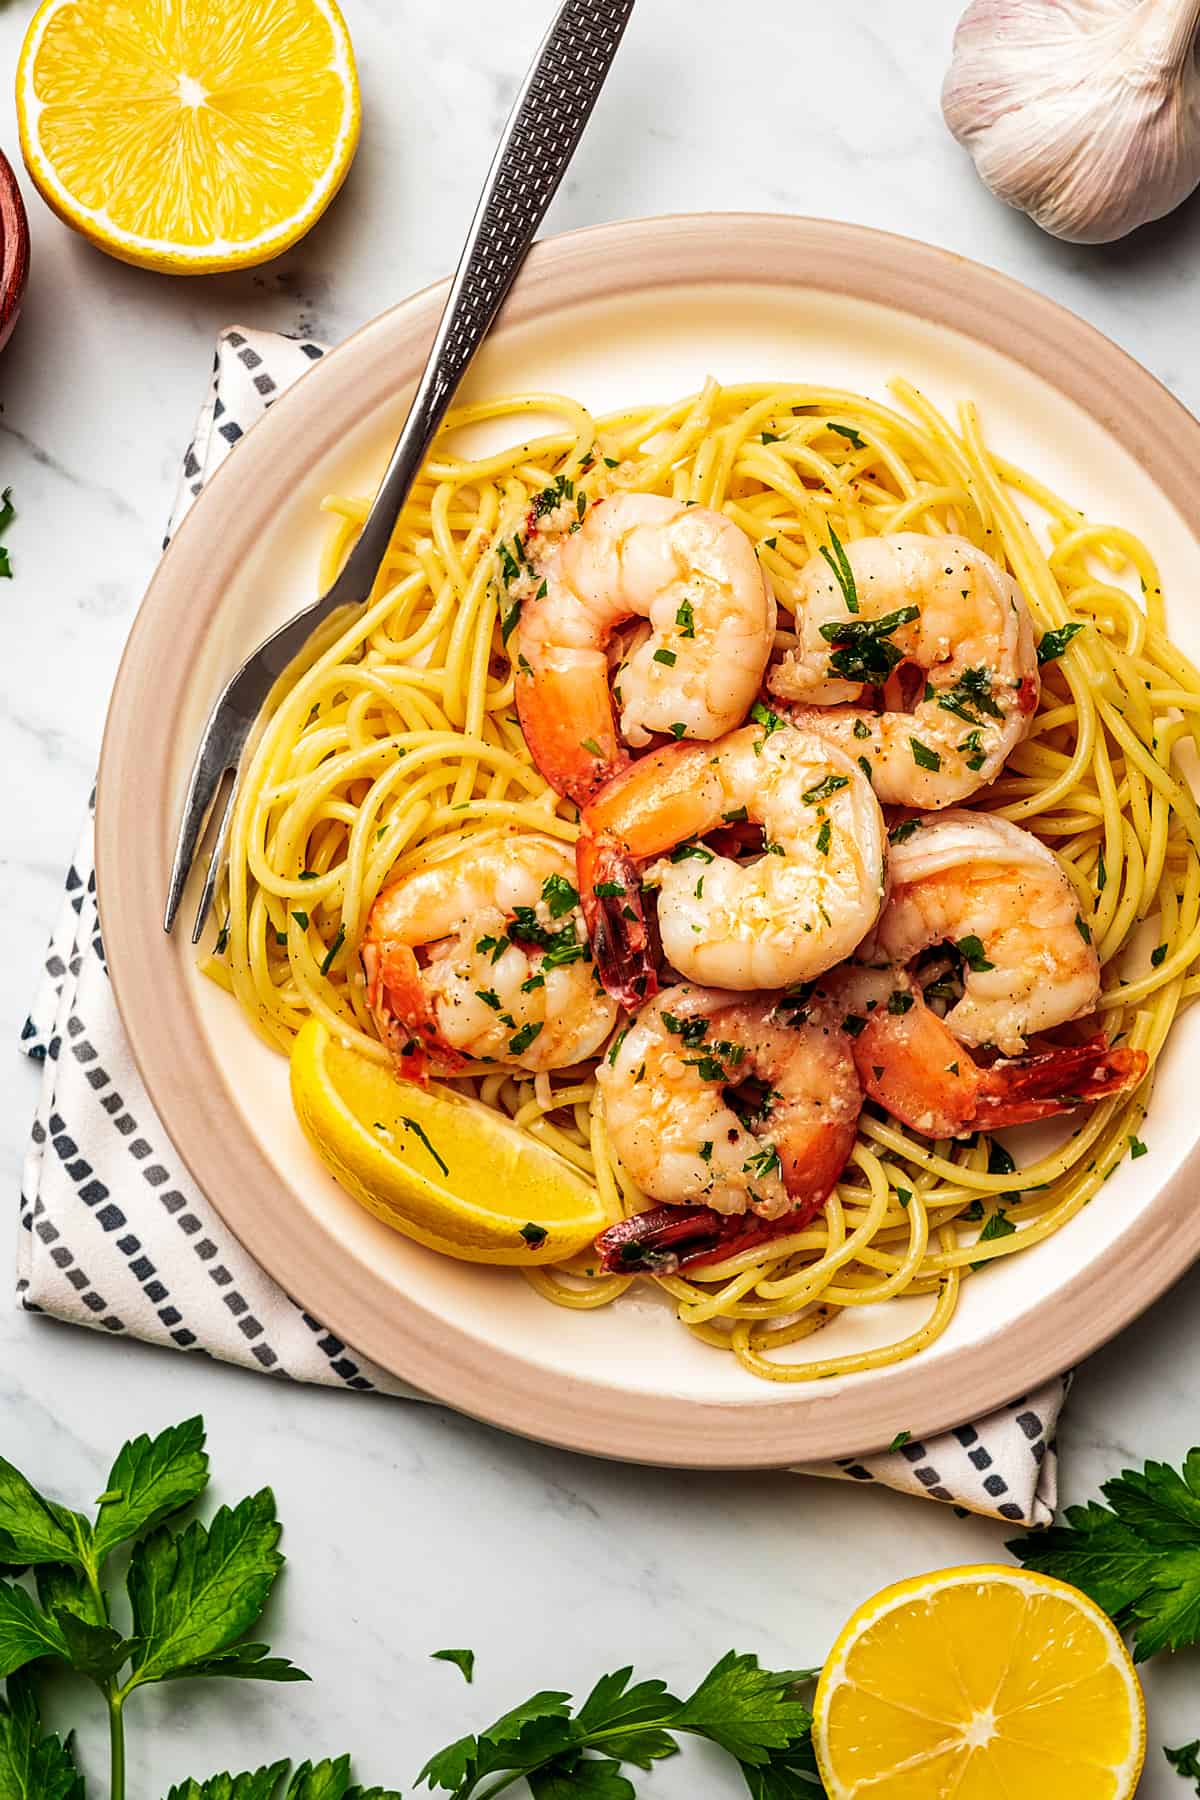 Shrimp scampi on top of spaghetti with lemon wedges